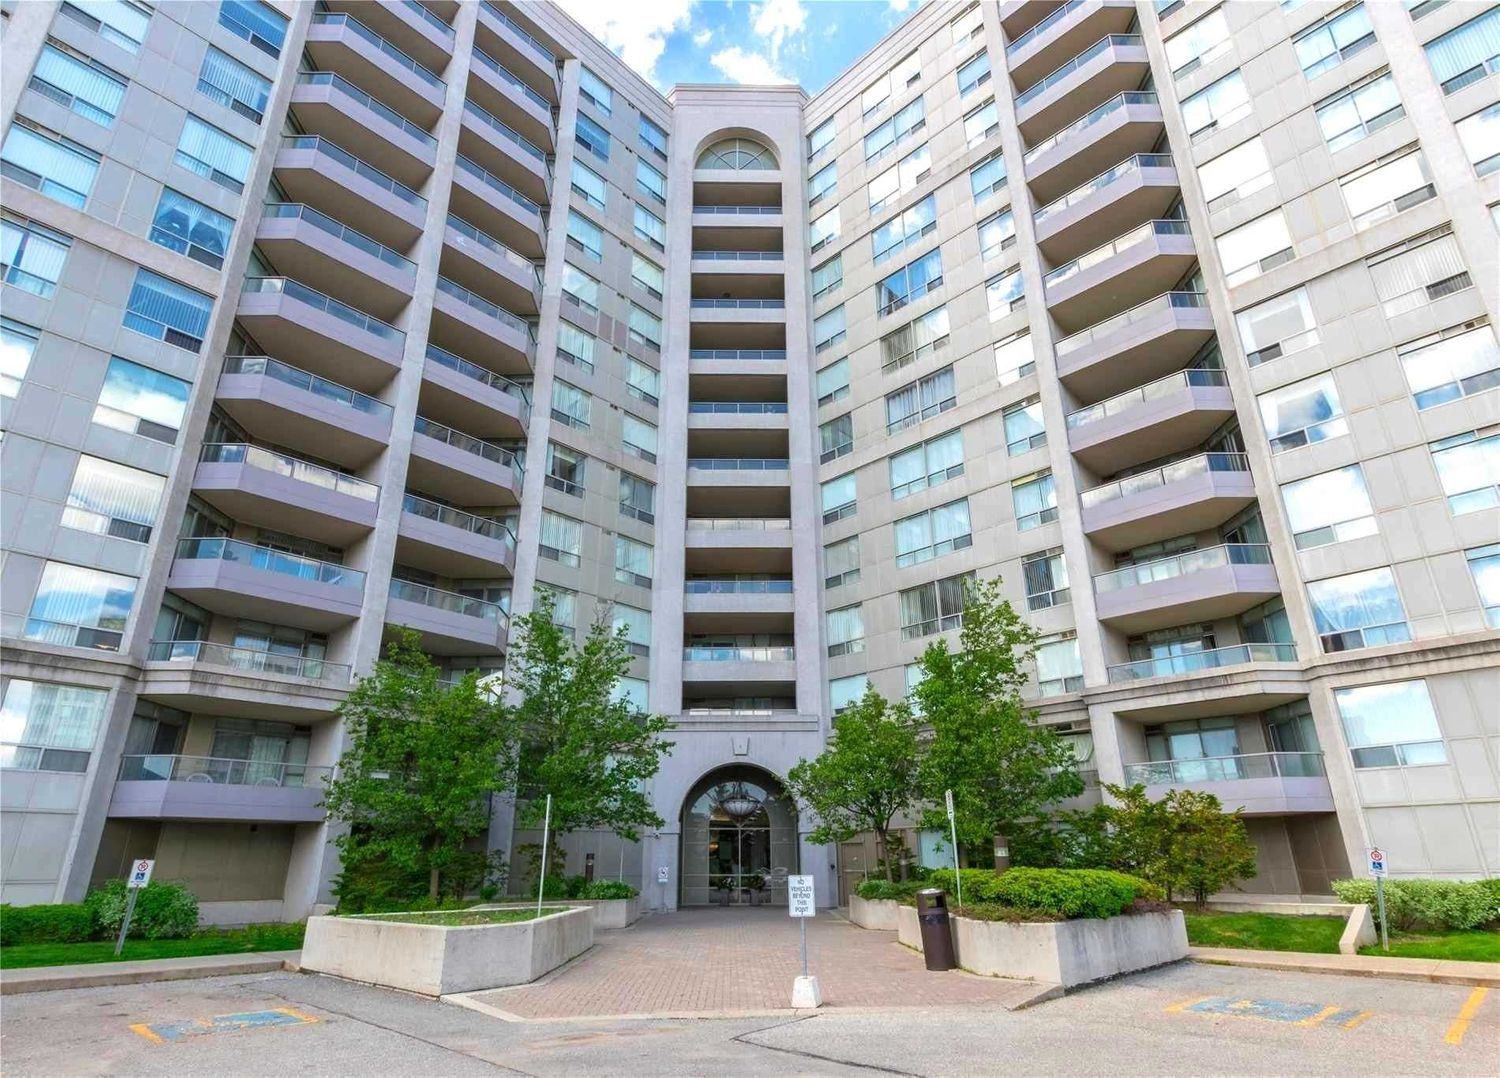 9015 Leslie Street. Grand Parkway Residences I Condos is located in  Richmond Hill, Toronto - image #2 of 2